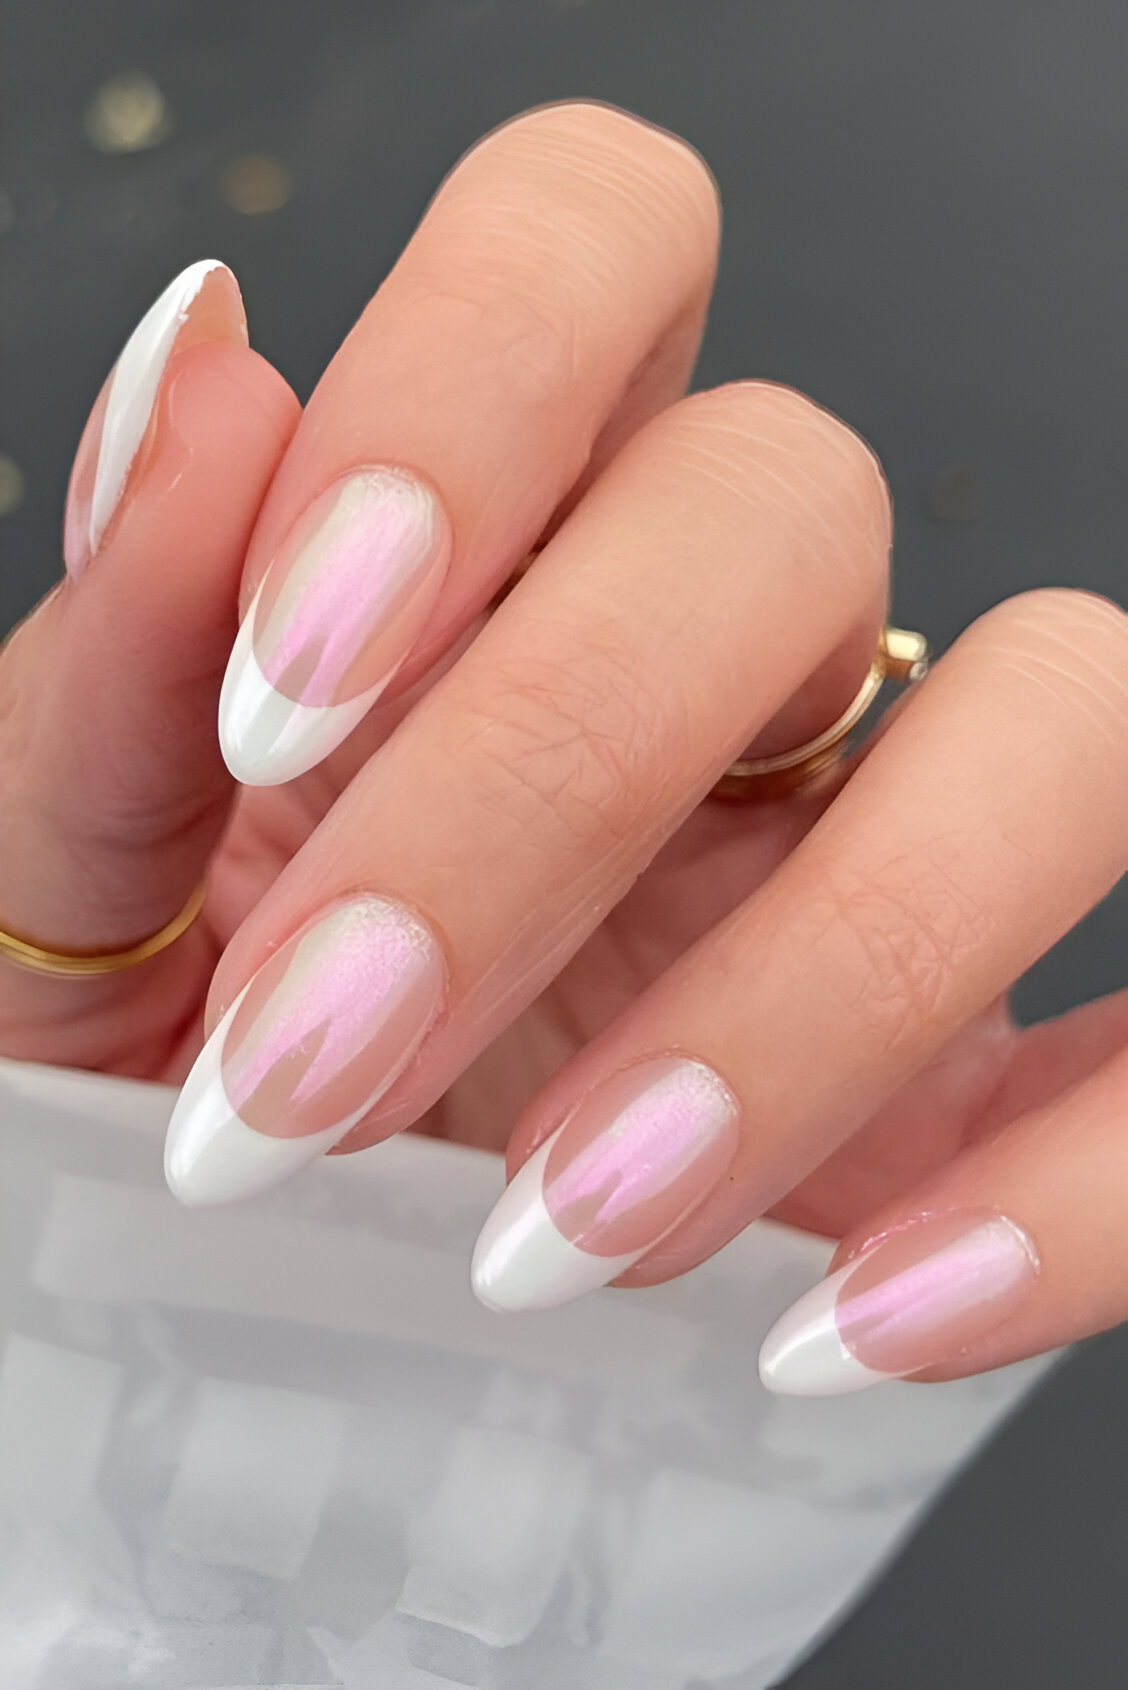 Short Almond French Tips 7